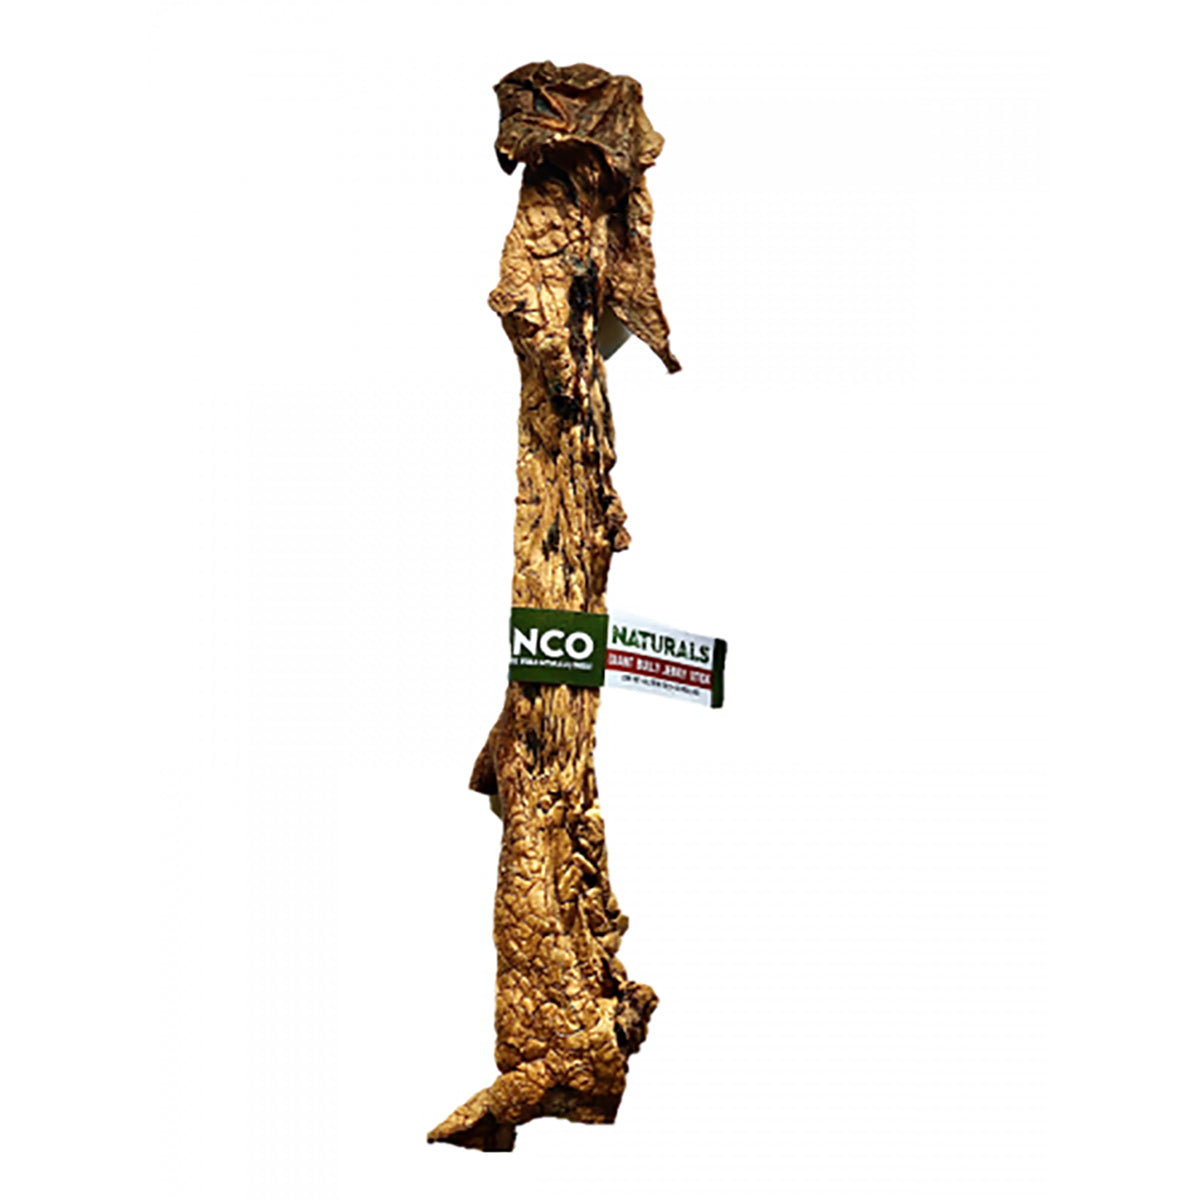 Anco Naturals Giant Jerky Stick